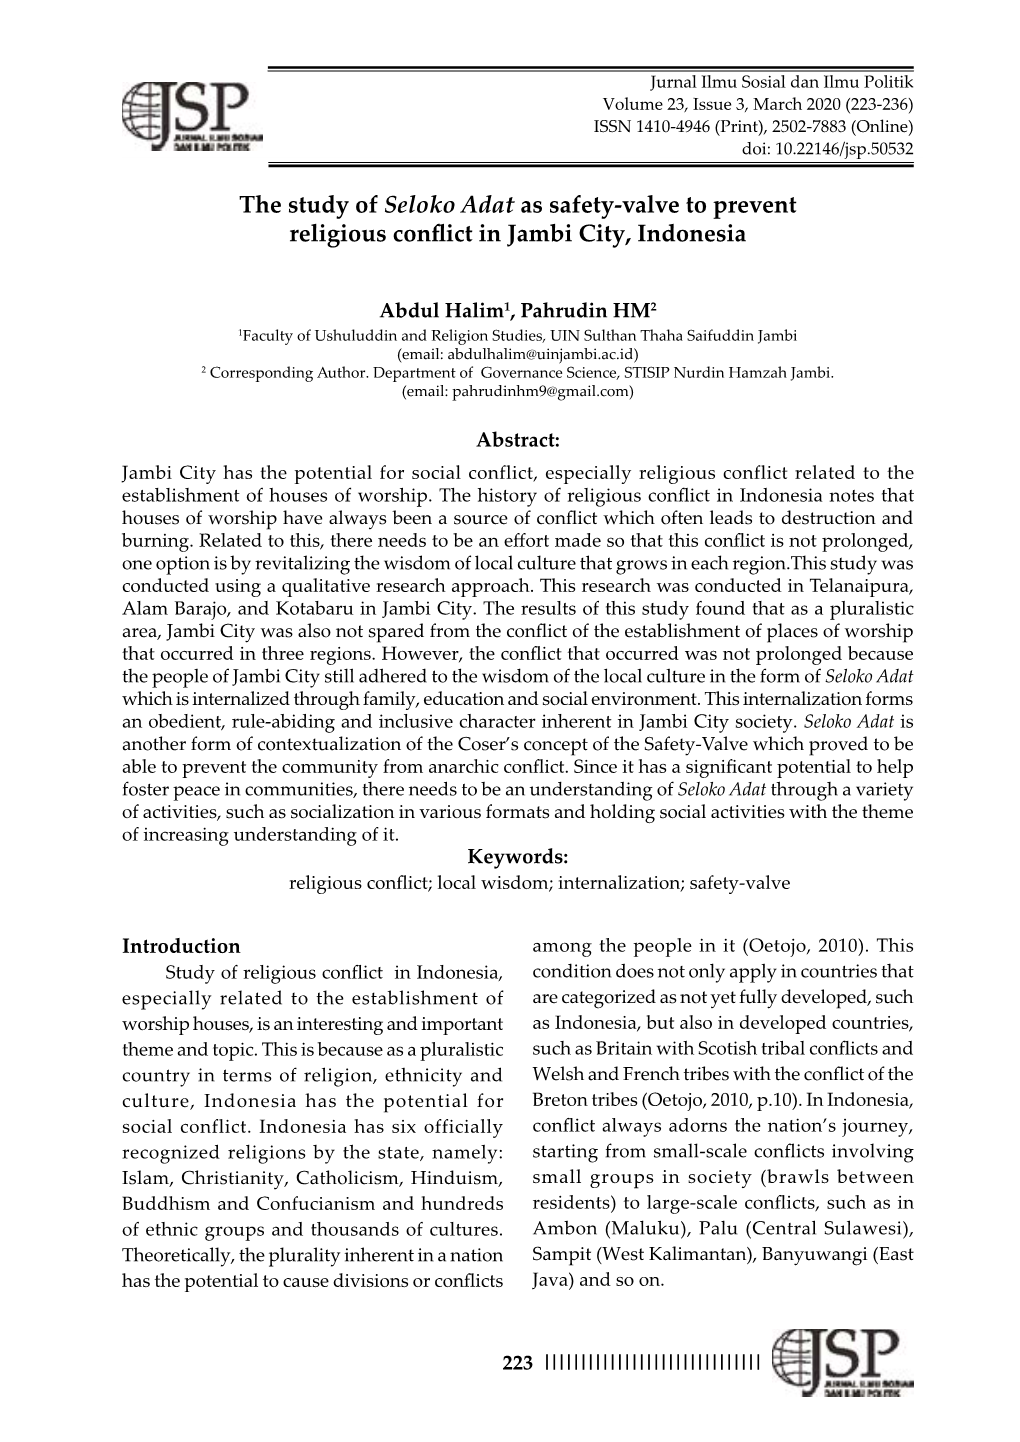 The Study of Seloko Adat As Safety-Valve to Prevent Religious Conflict in Jambi City, Indonesia